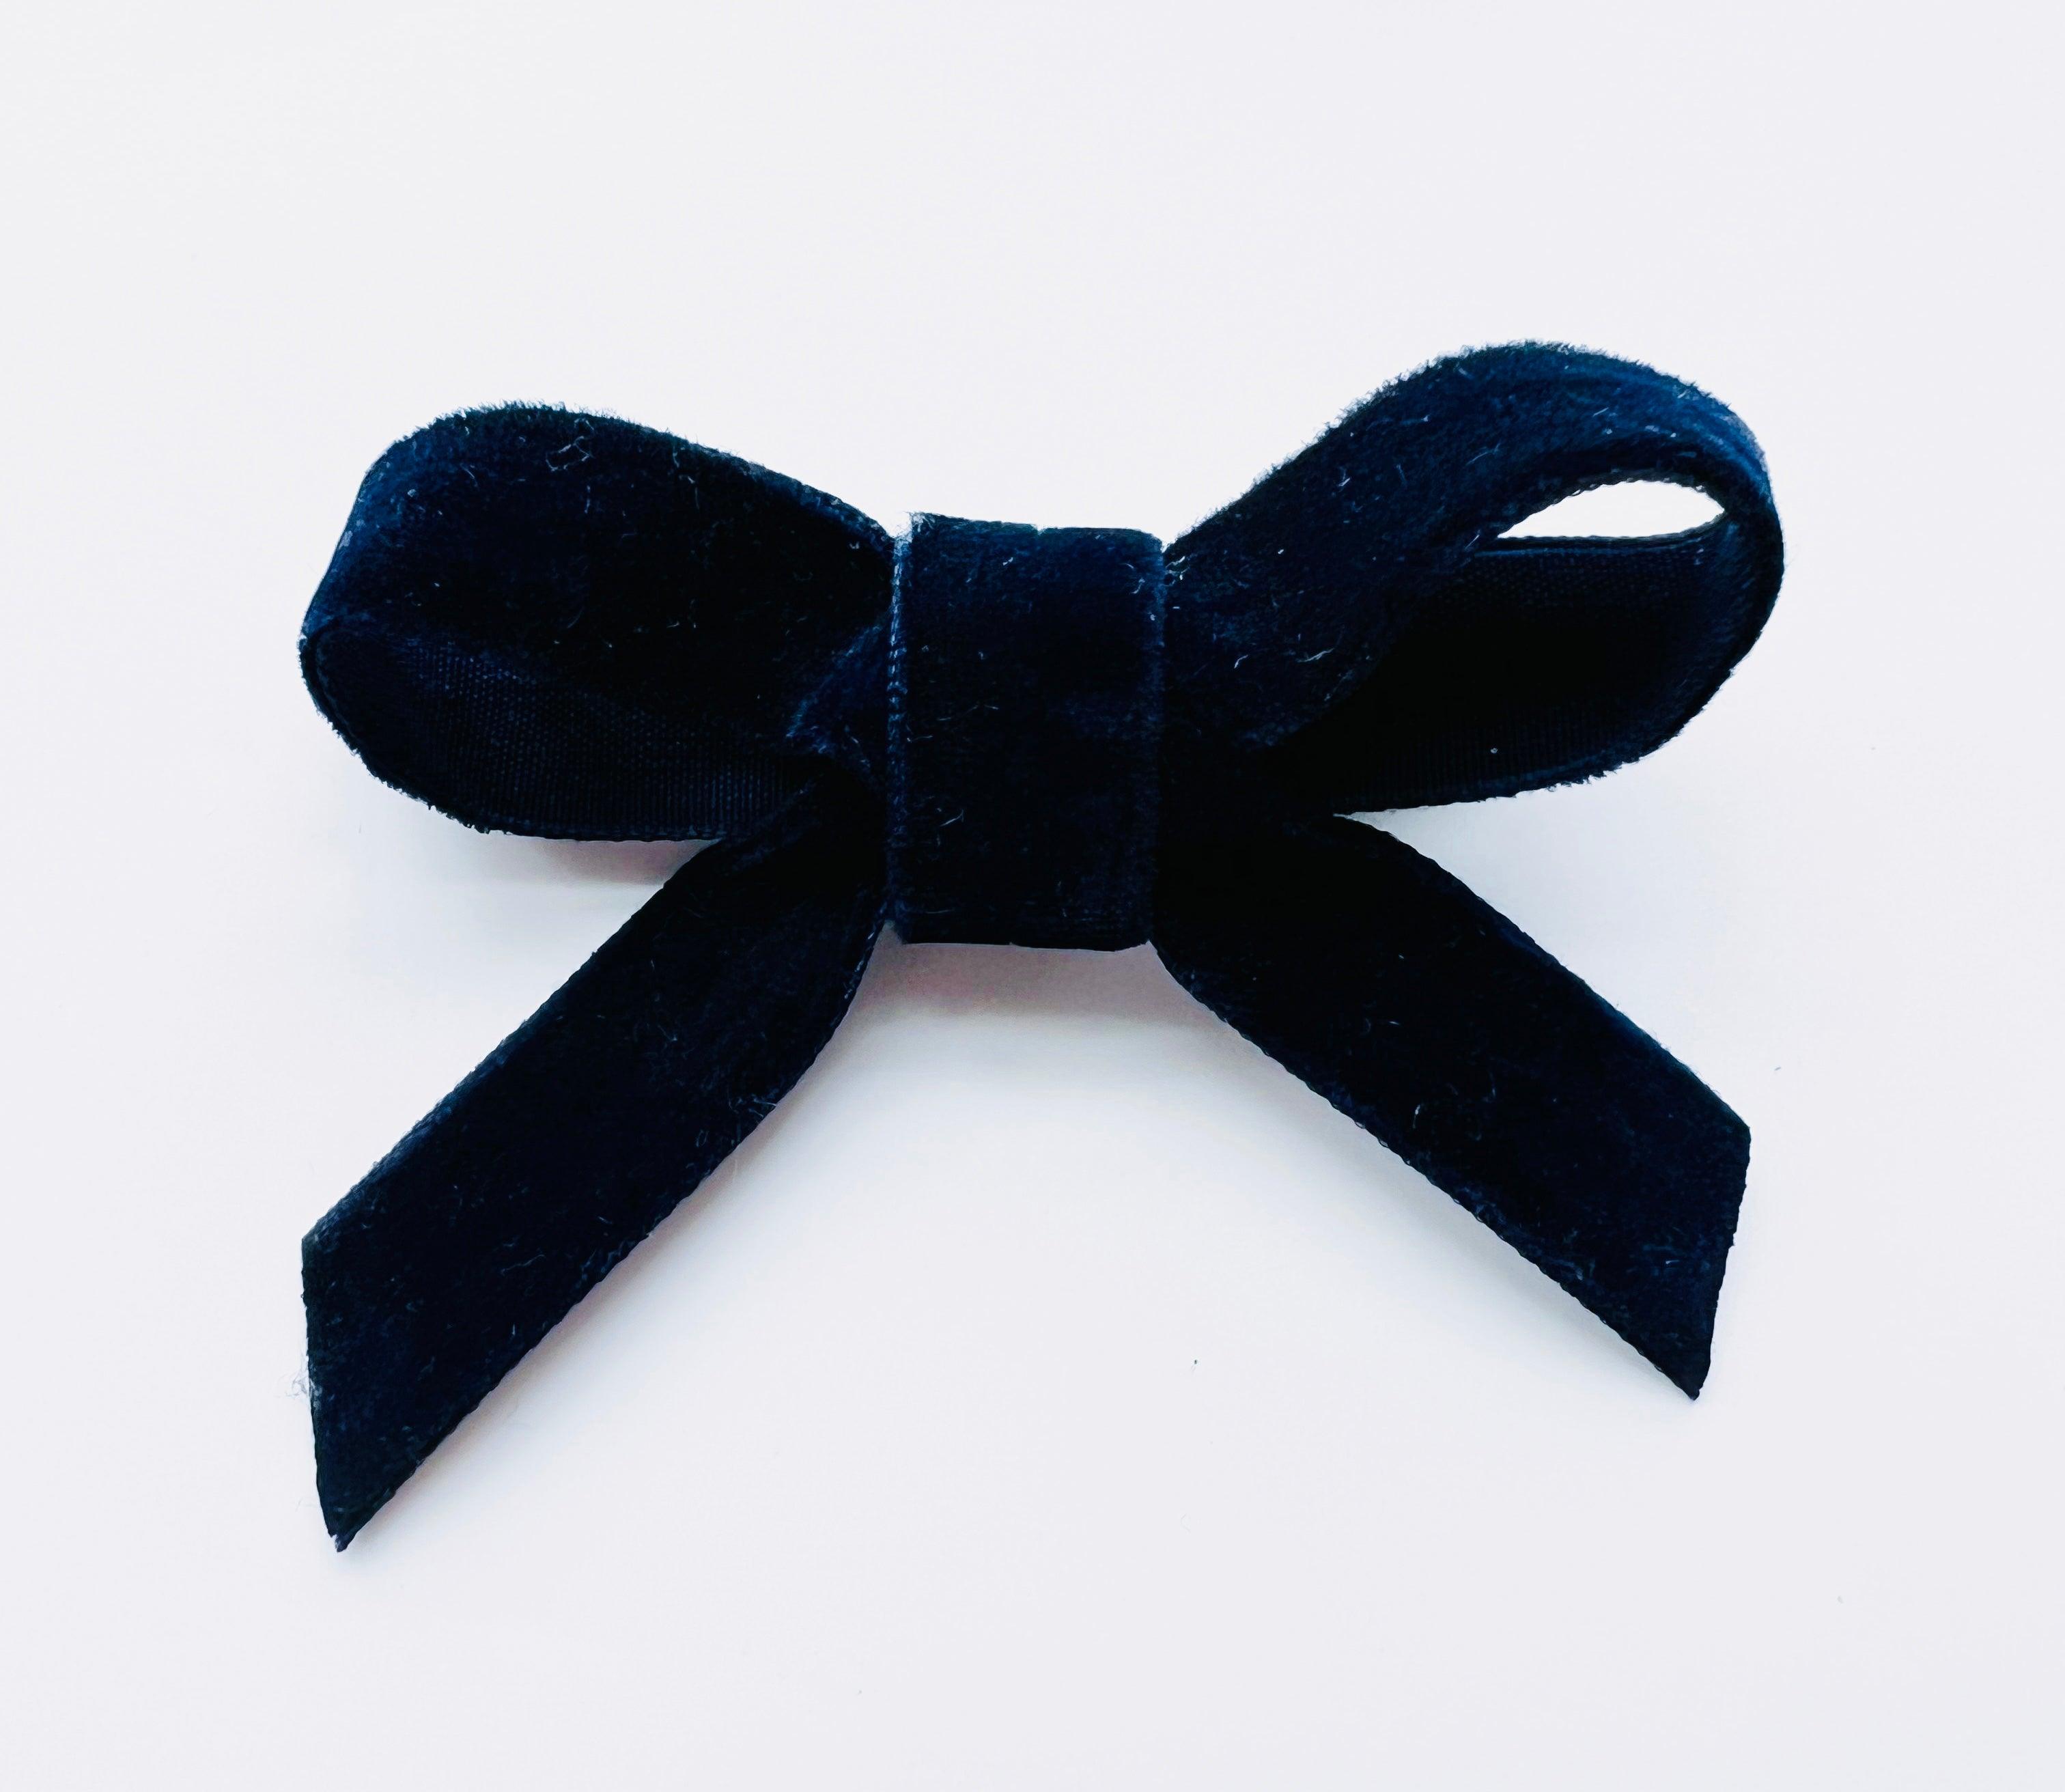 Velvet Ribbon - Navy Mini | Nashville Bow Co. - Classic Hair Bows, Bow Ties, Basket Bows, Pacifier Clips, Wreath Sashes, Swaddle Bows. Classic Southern Charm.